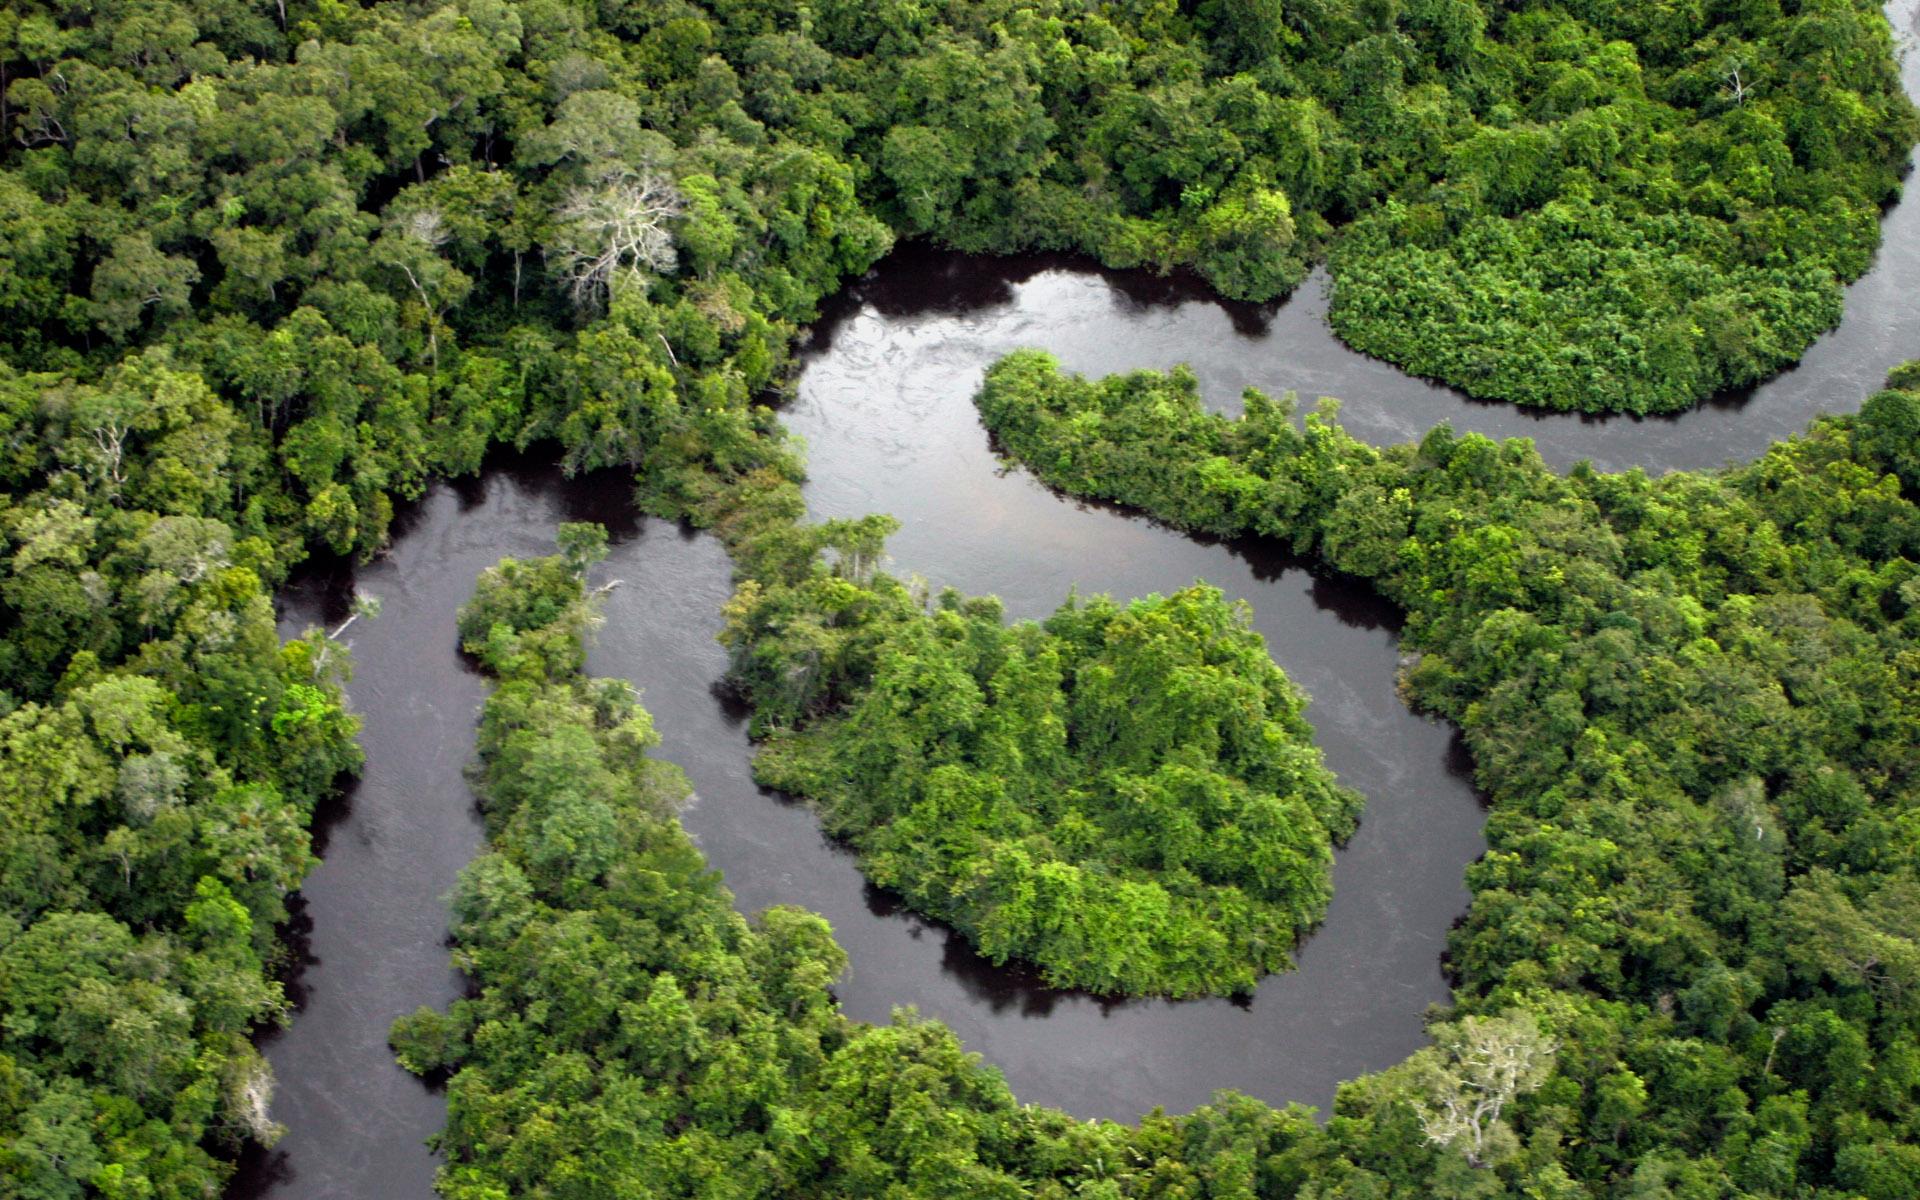 Amazon River Winding Through Rainforest Seen from the Air